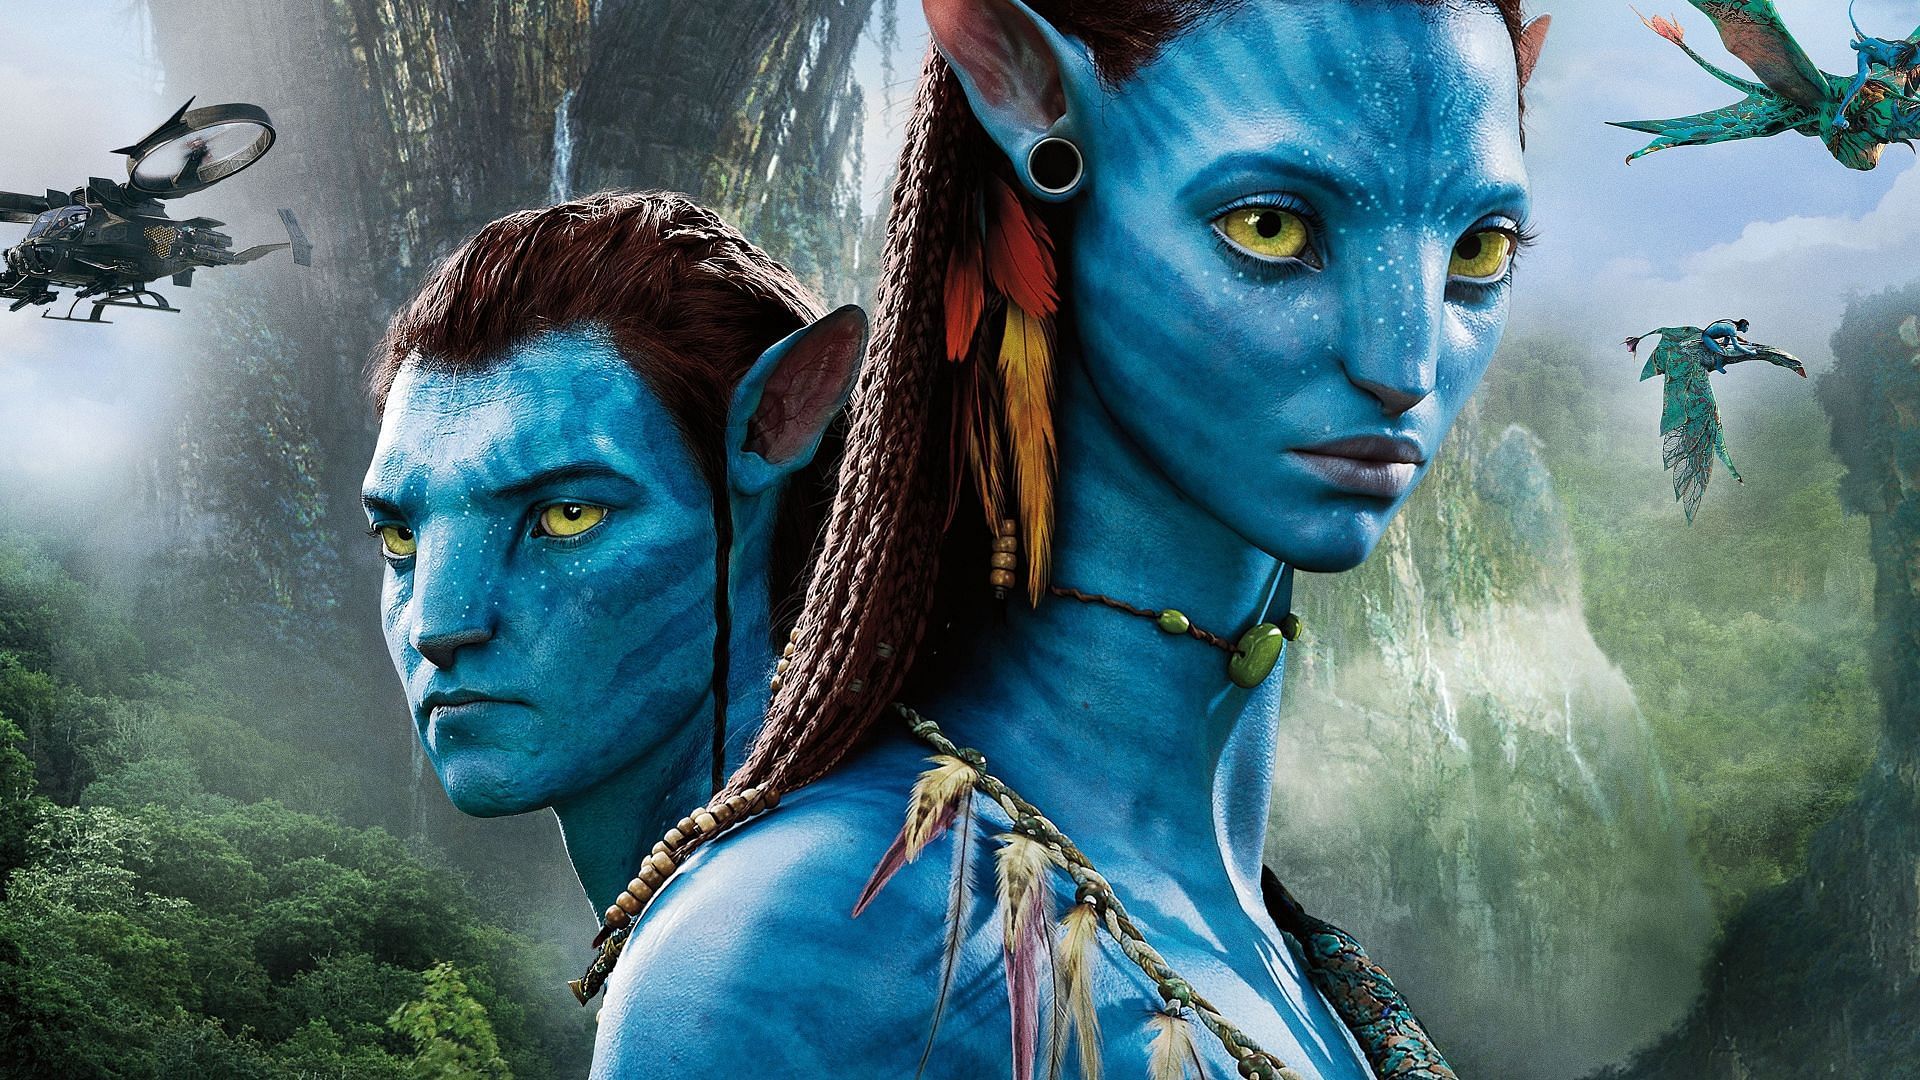 Is Avatar 2 horrible and racist? (image via 20th Century Studios)